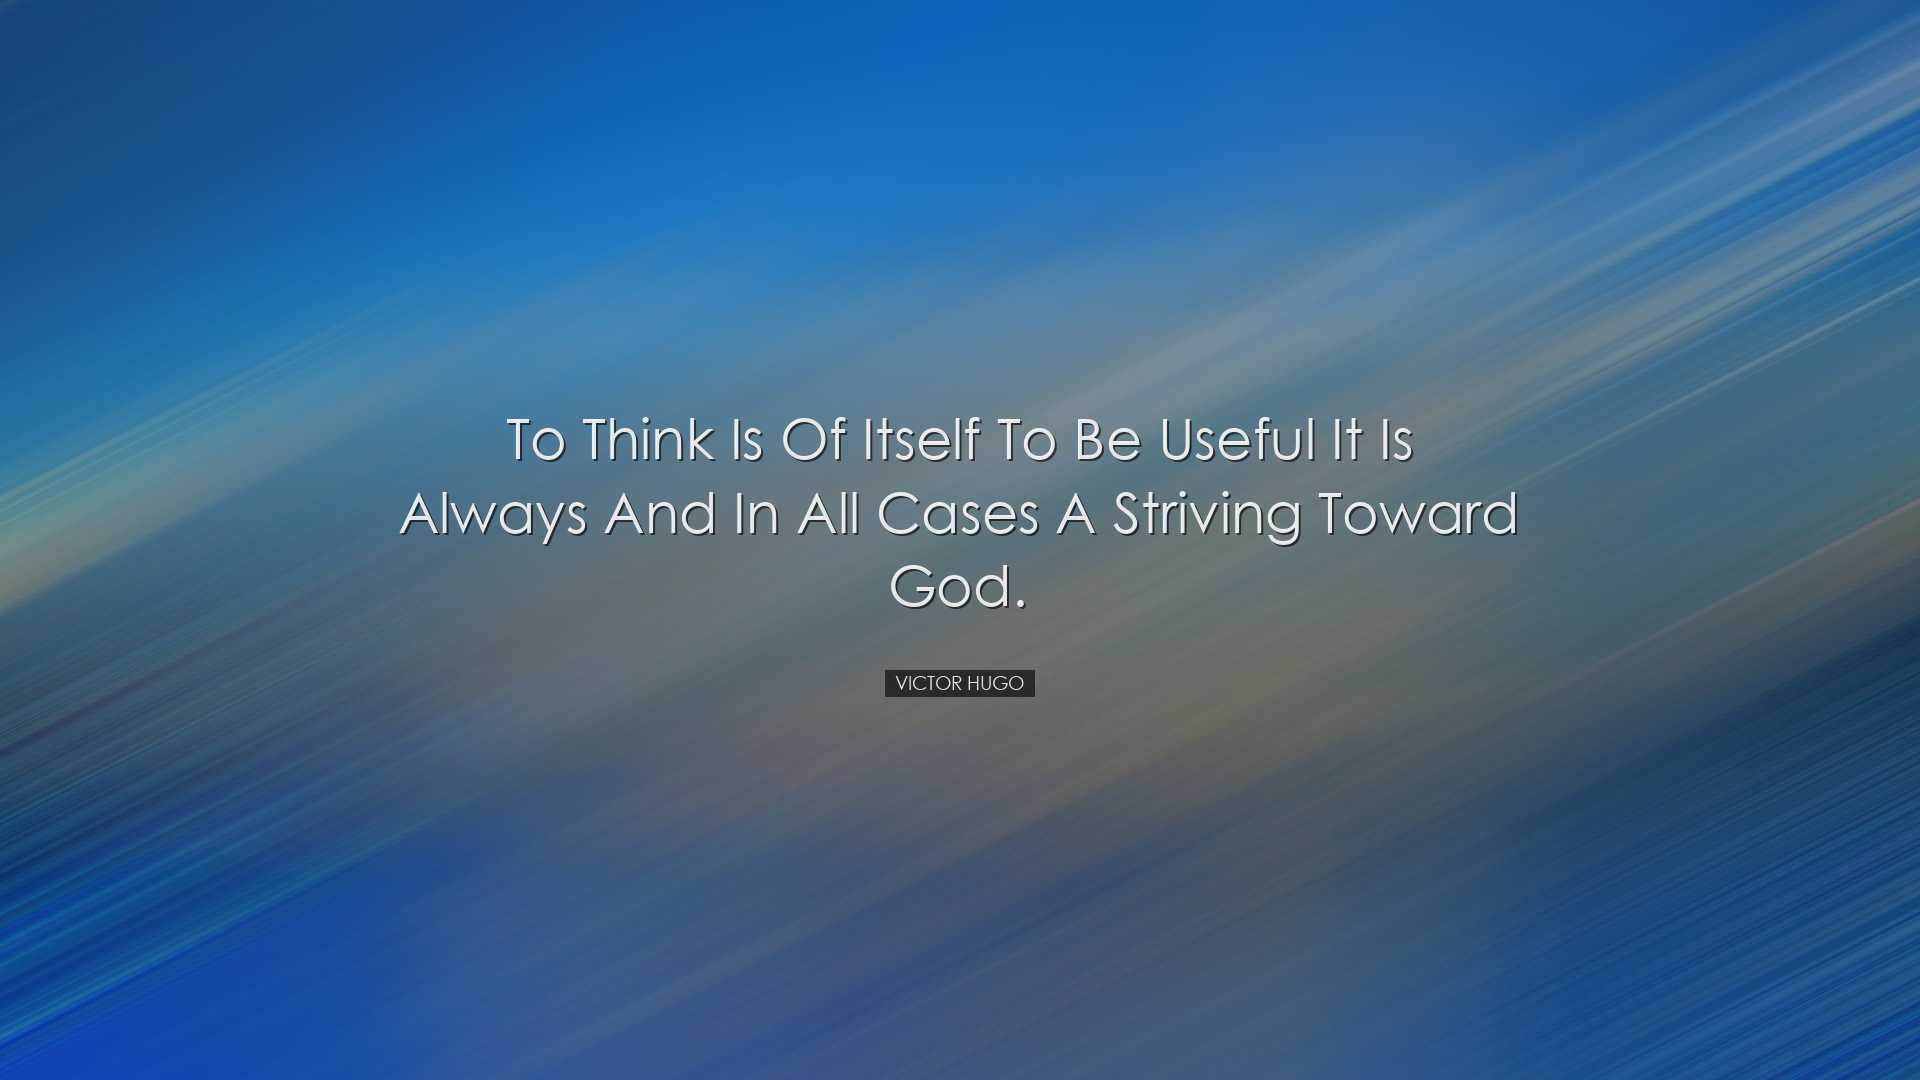 To think is of itself to be useful it is always and in all cases a